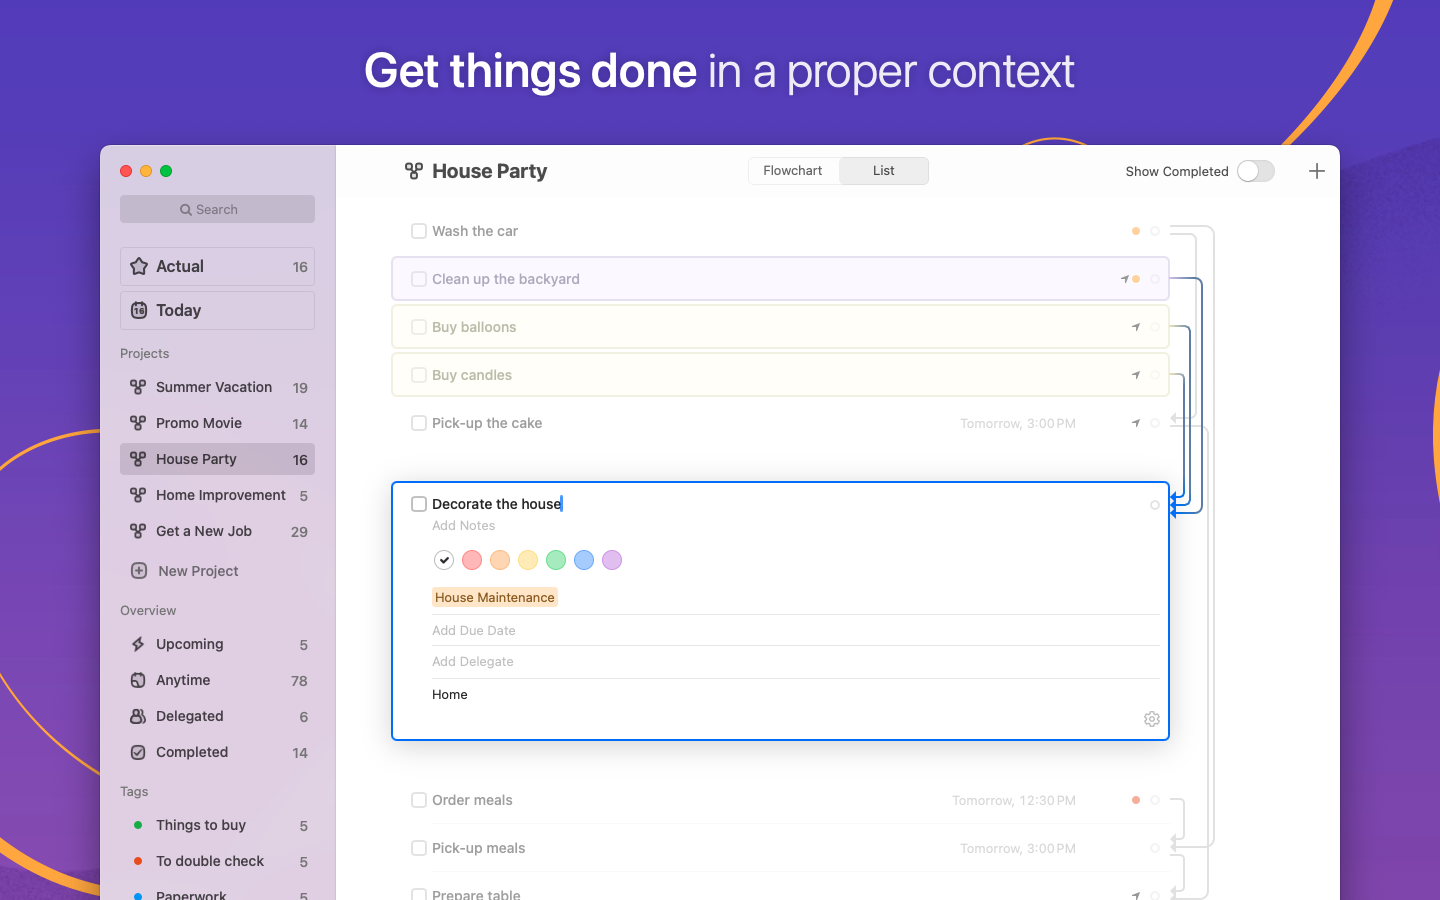 Taskheat by Eyen Get things done in a proper context